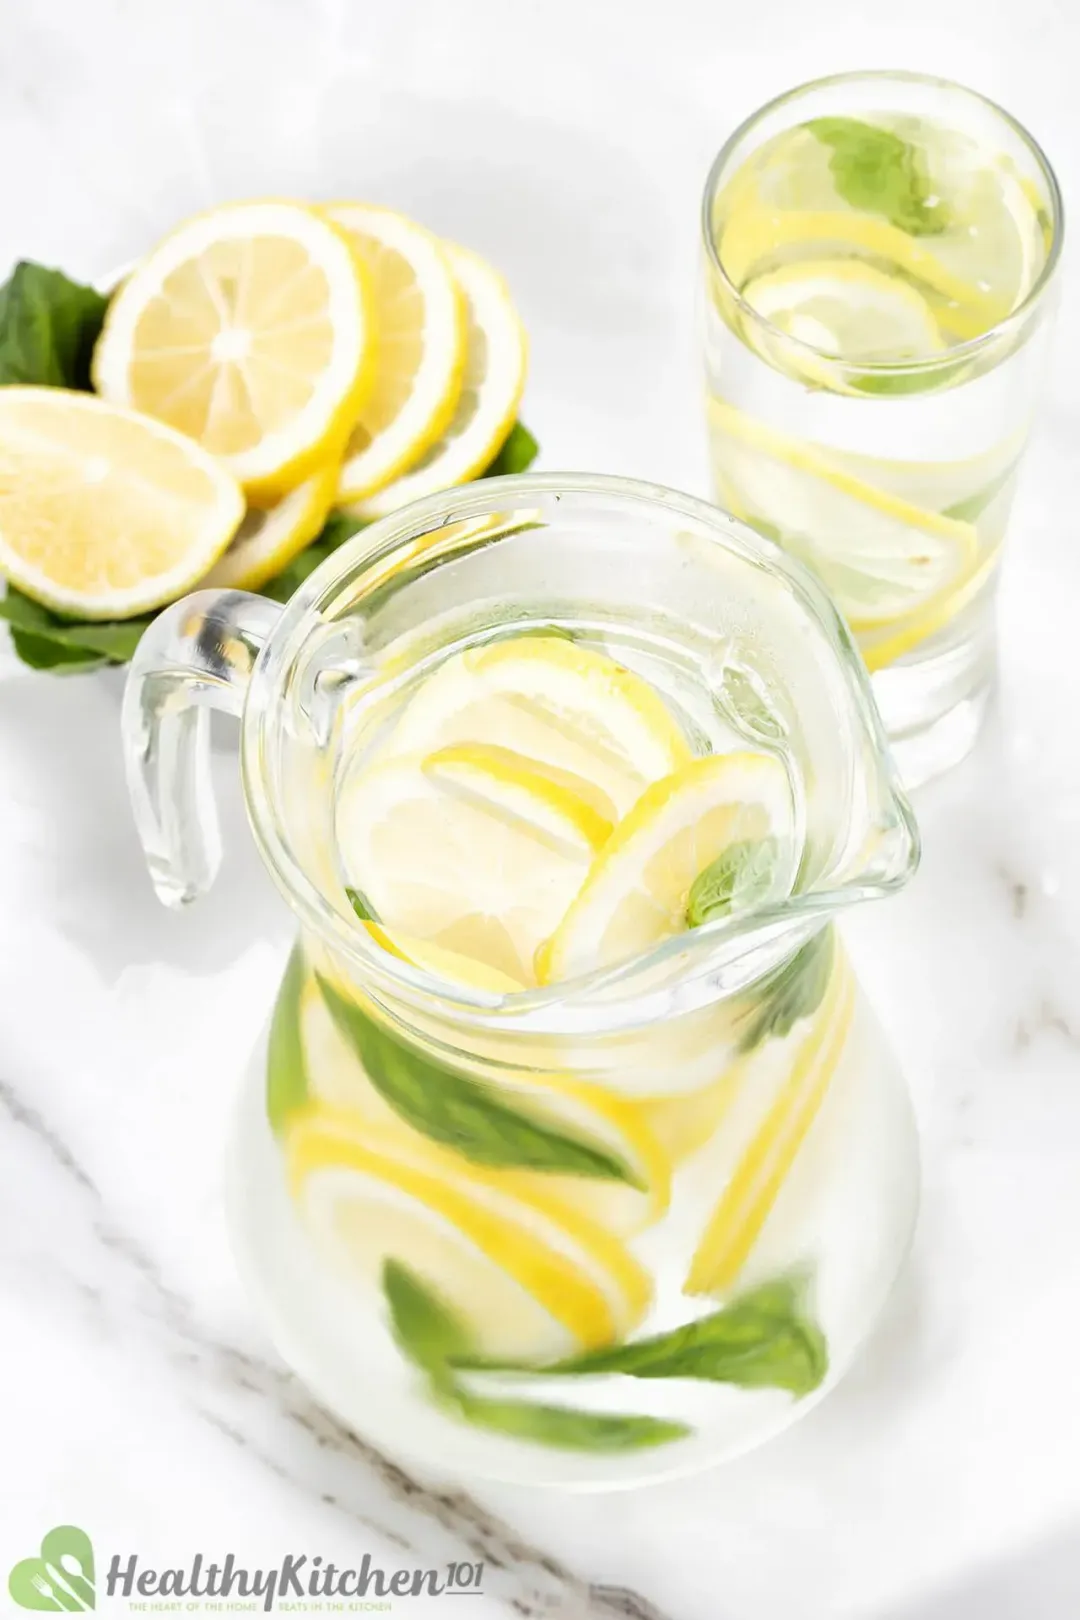 A pitcher and a glass of lemon and mint water next to a bowl of lemon wheels on some basils